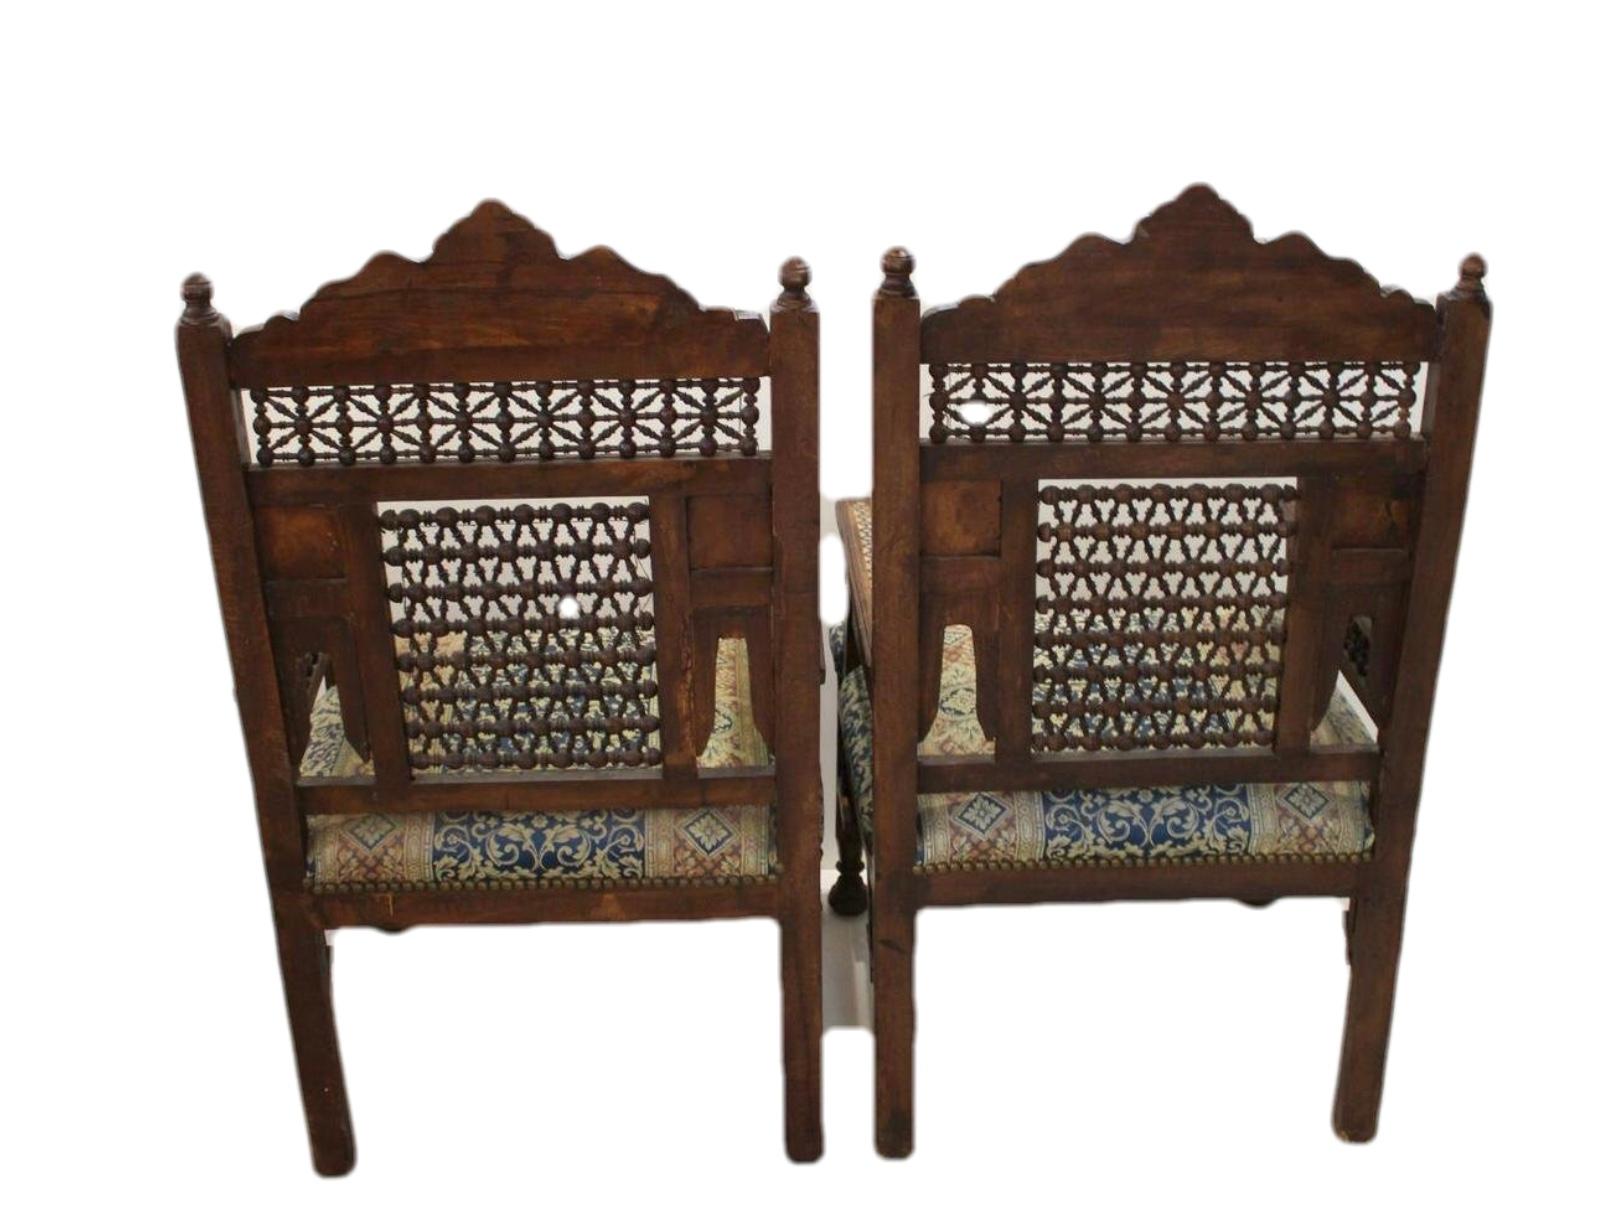 Pair of Middle Eastern Syrian (20th Cent) side chairs in walnut with inlaid bone, mother of pearl and ebony with spindle & ball and finial details (matching 2 arms & settee